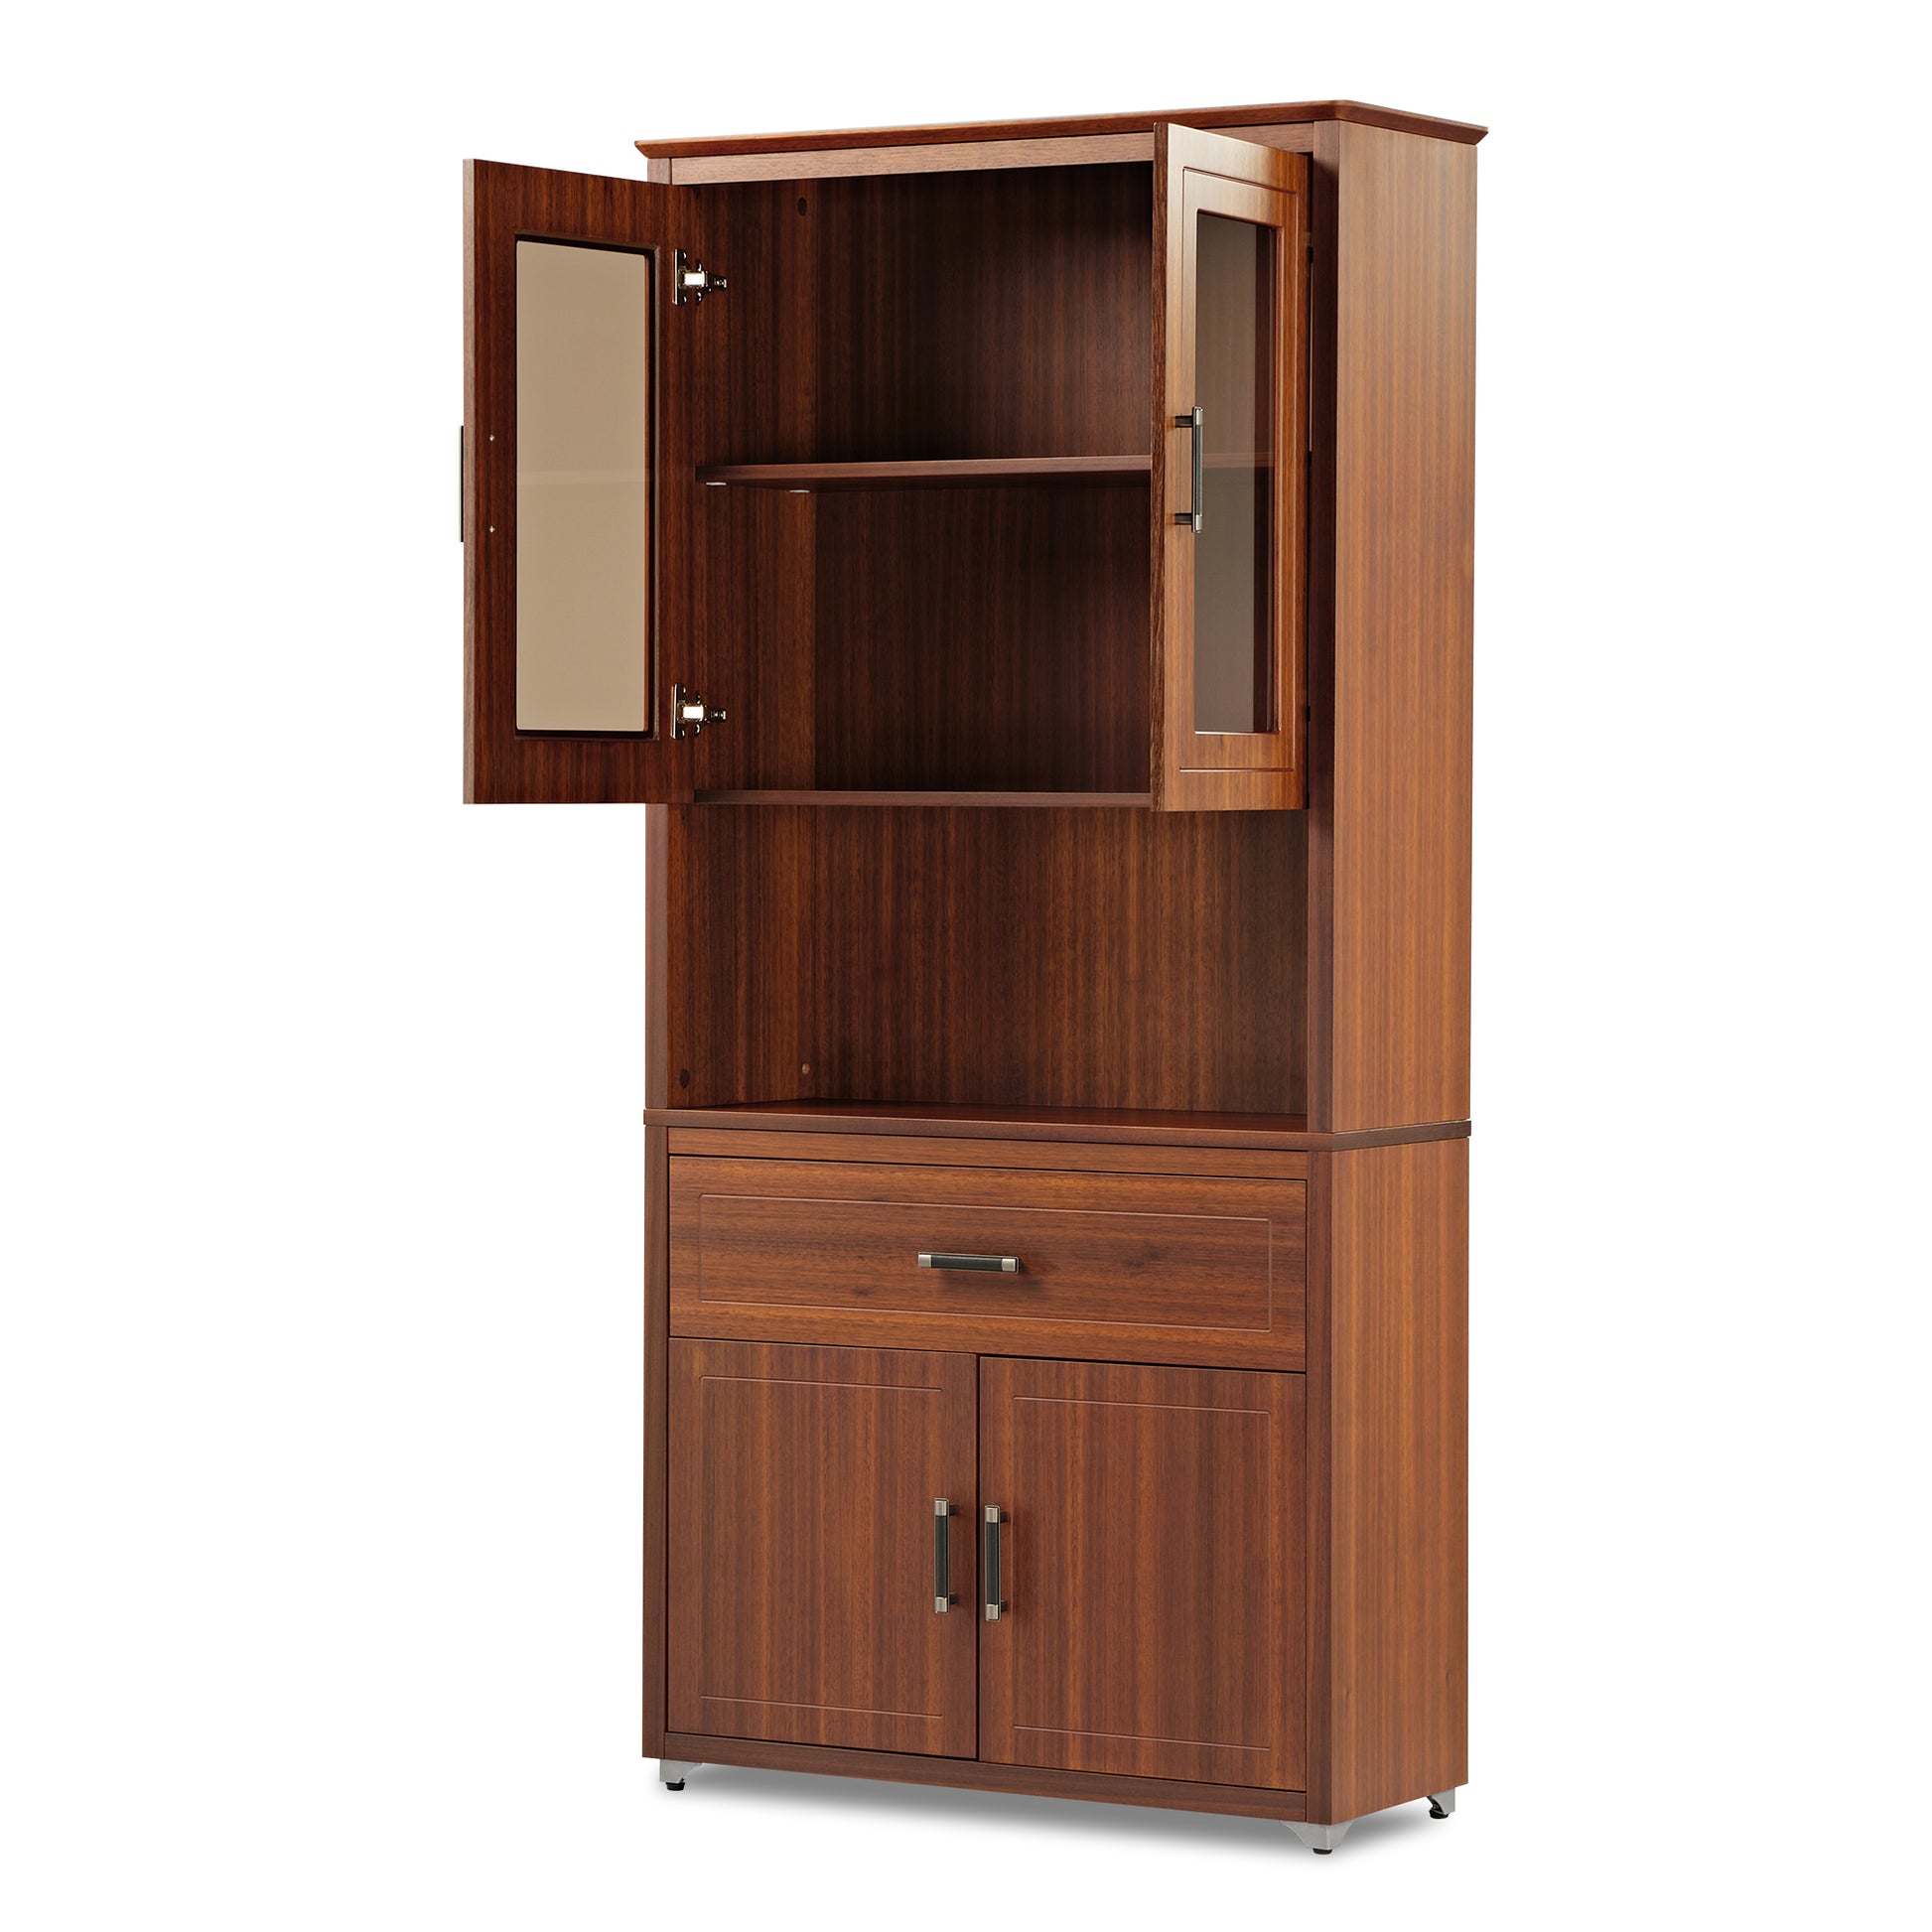 Executive Ark Collection, 72 inch Storage Cabinet Bookshelf with Doors, Walnut with Top Open Display Image